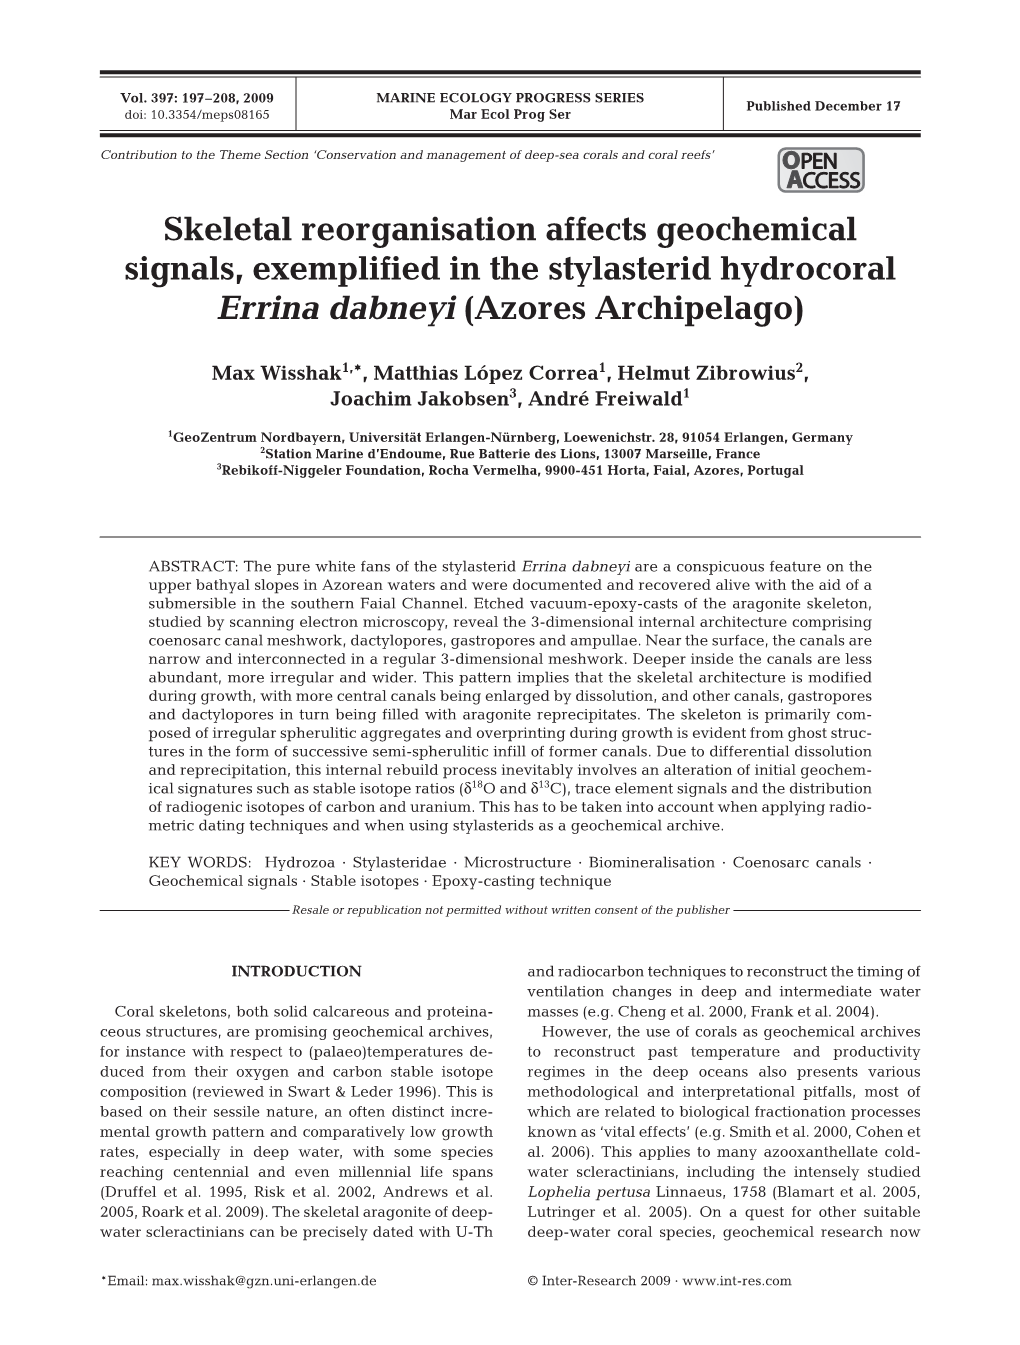 Skeletal Reorganisation Affects Geochemical Signals, Exemplified in the Stylasterid Hydrocoral Errina Dabneyi (Azores Archipelago)